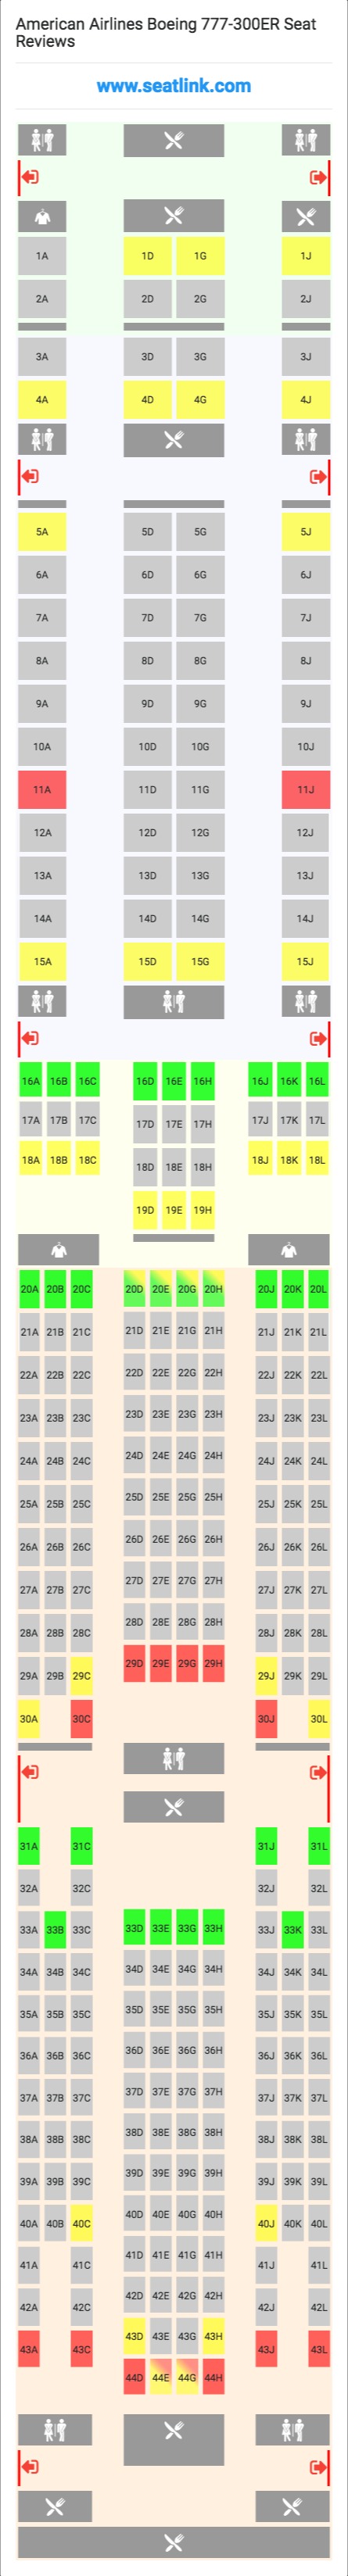 American Airlines Boeing 777-300ER (77W) Seat Map